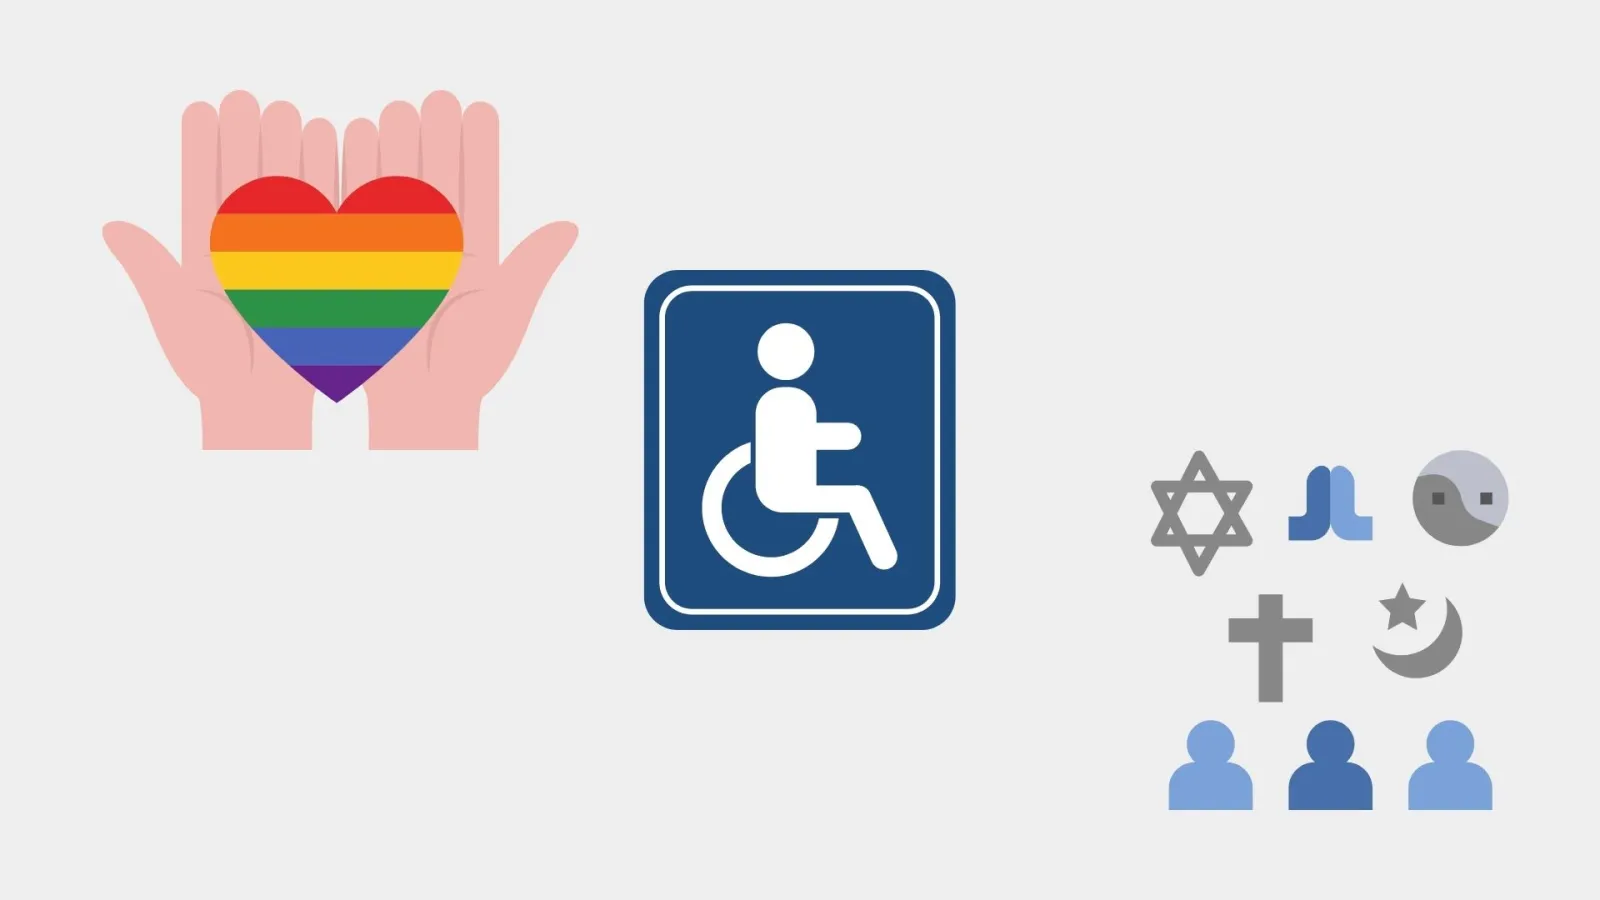 Graphic showing different religions, sexual orientation and handicaps